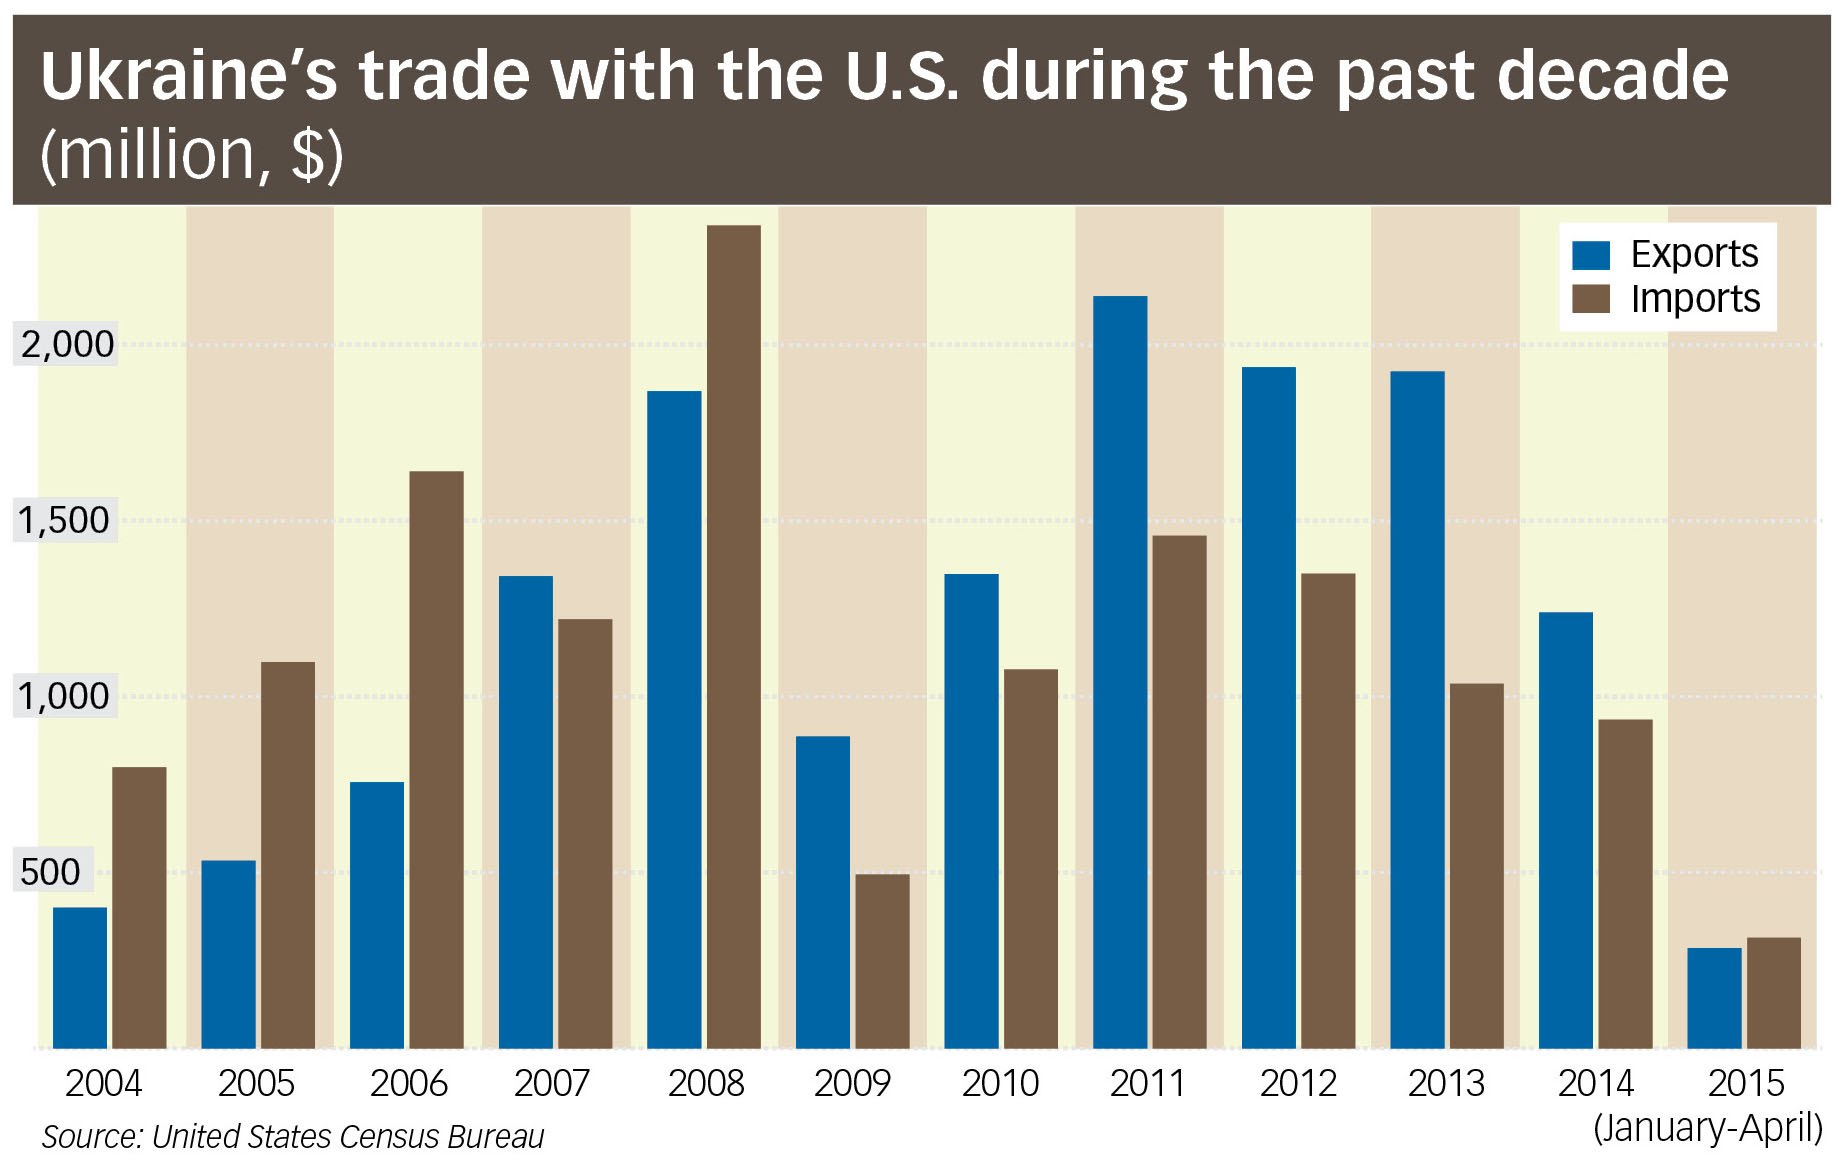 Since 2004, Ukraine-U.S. trade relations have barely improved. On the contrary, bilateral trade turnover has been getting closer to where it started off.  Since 2009, Ukraine has had a trade surplus with the U.S., where its exports have exceeded imports. 